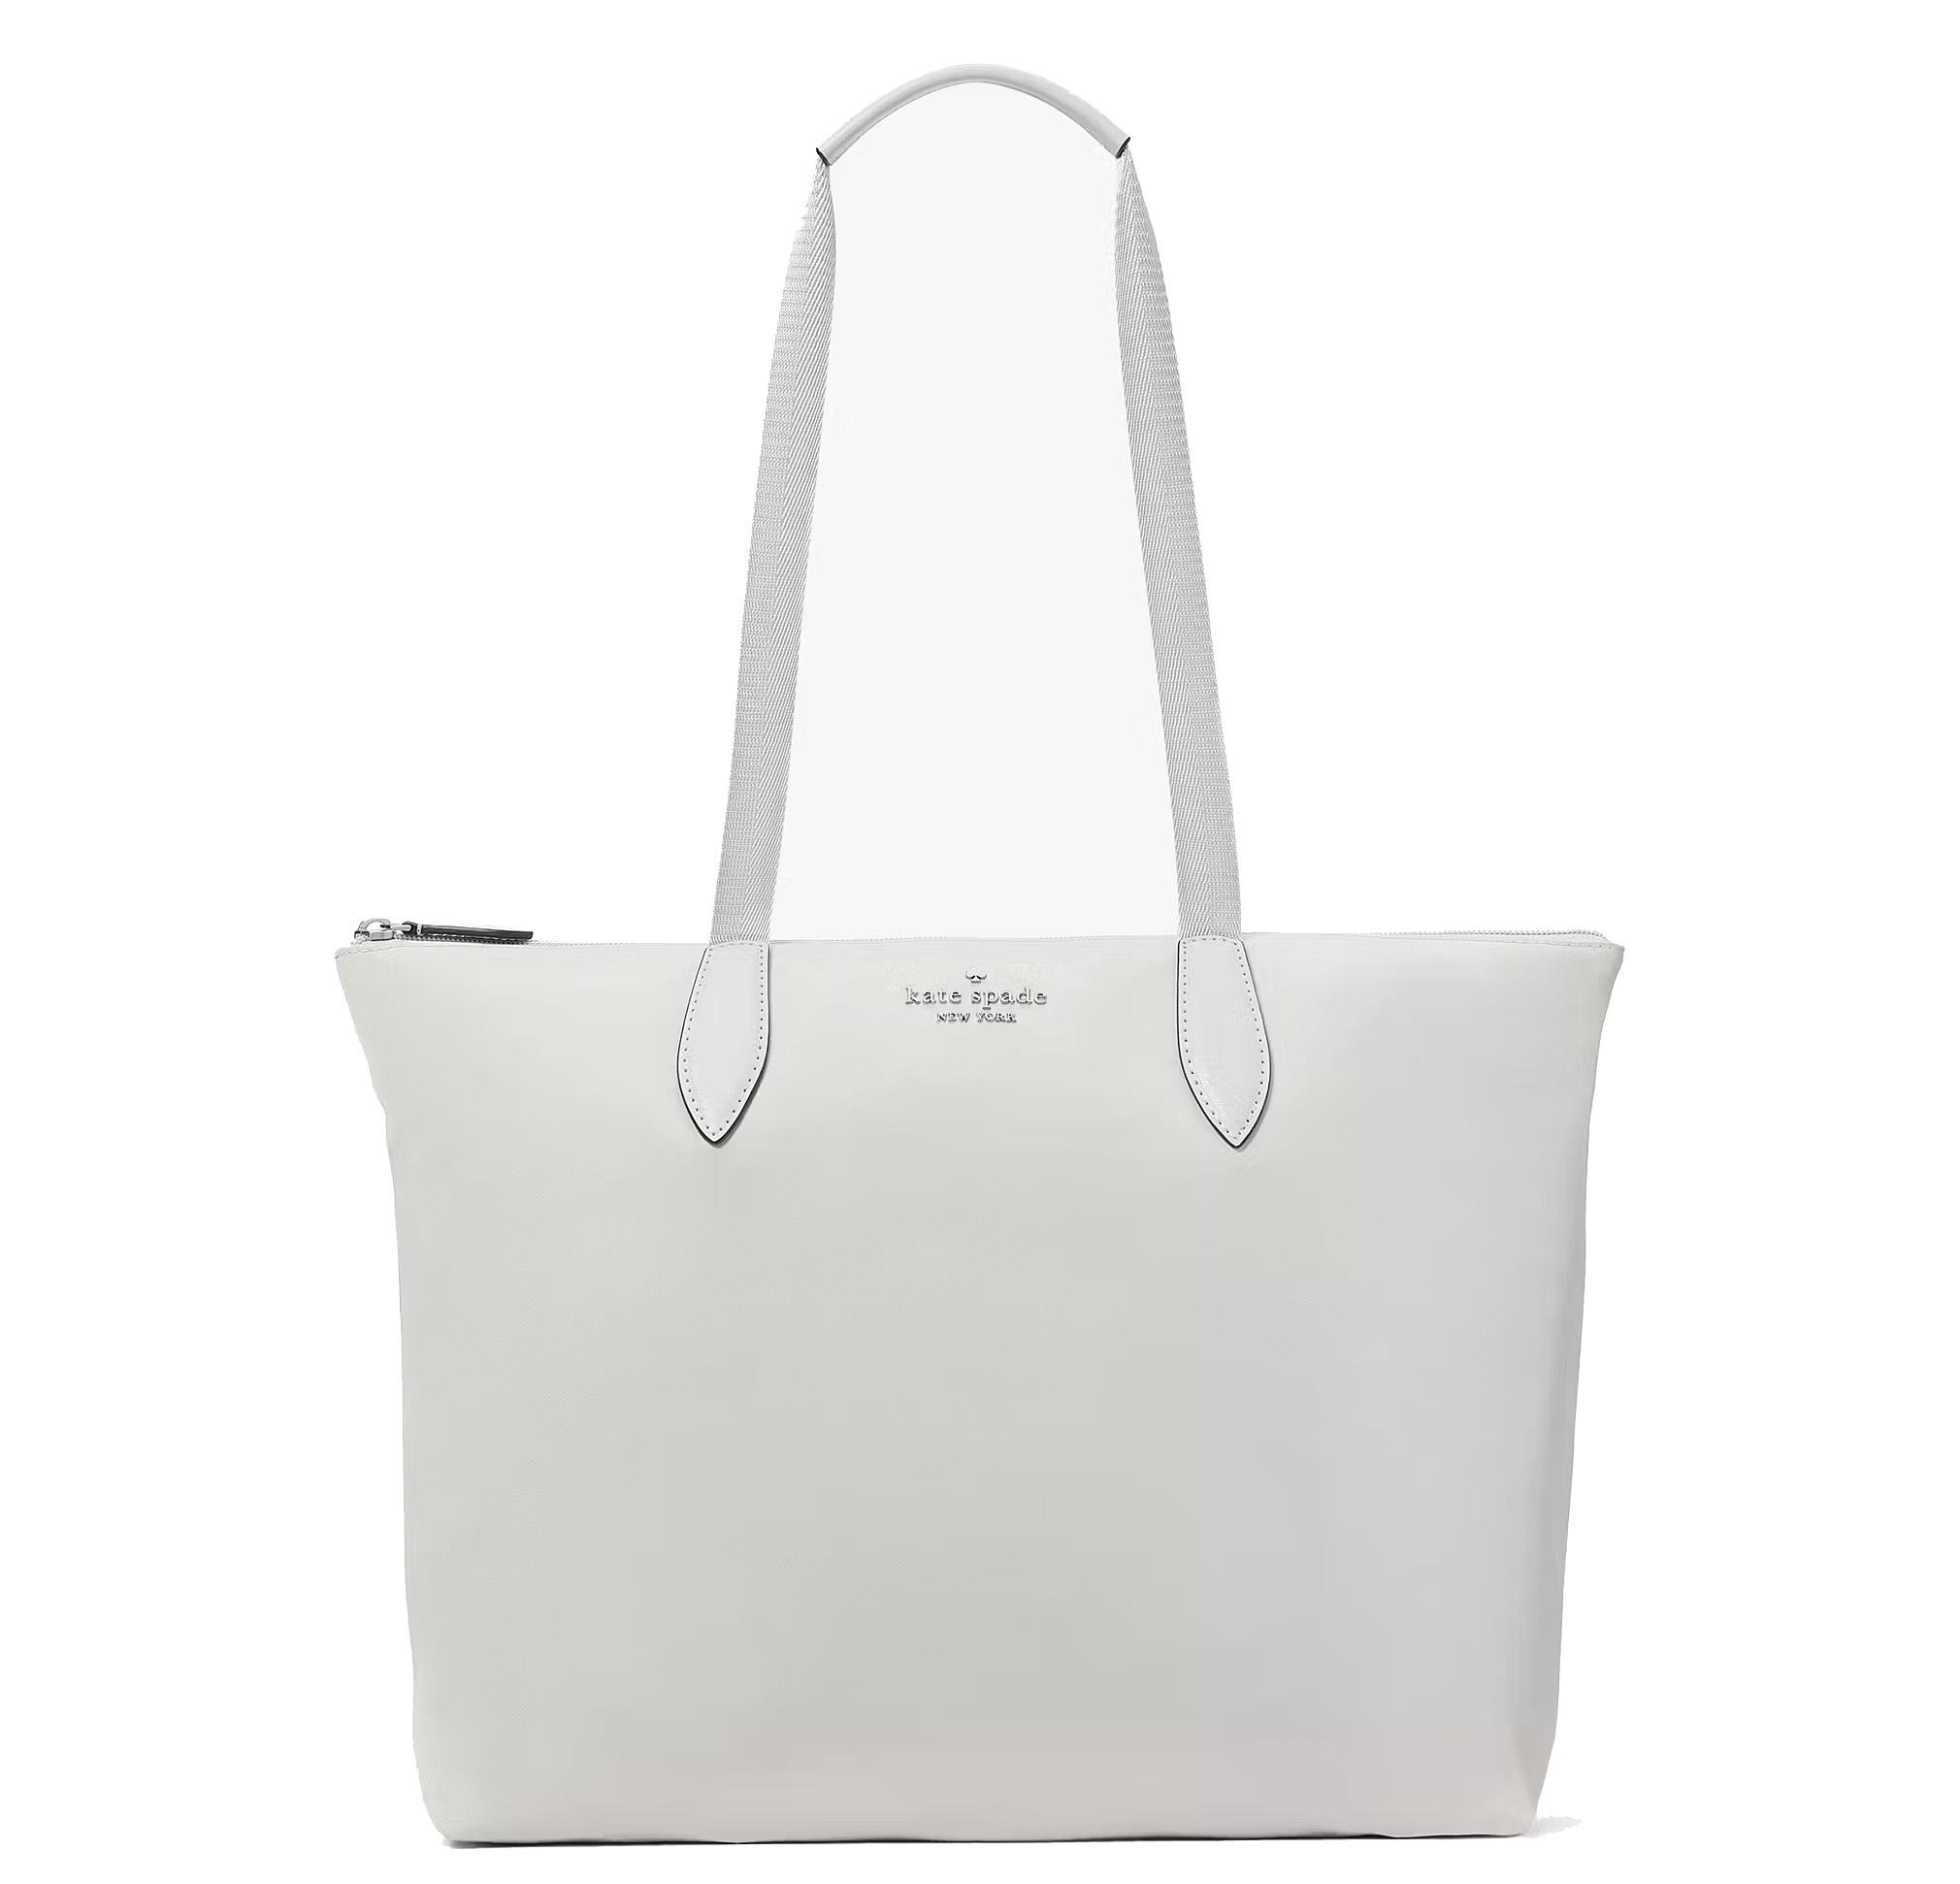 Kate Spade Mel Packable Tote Bag for $69 Shipped